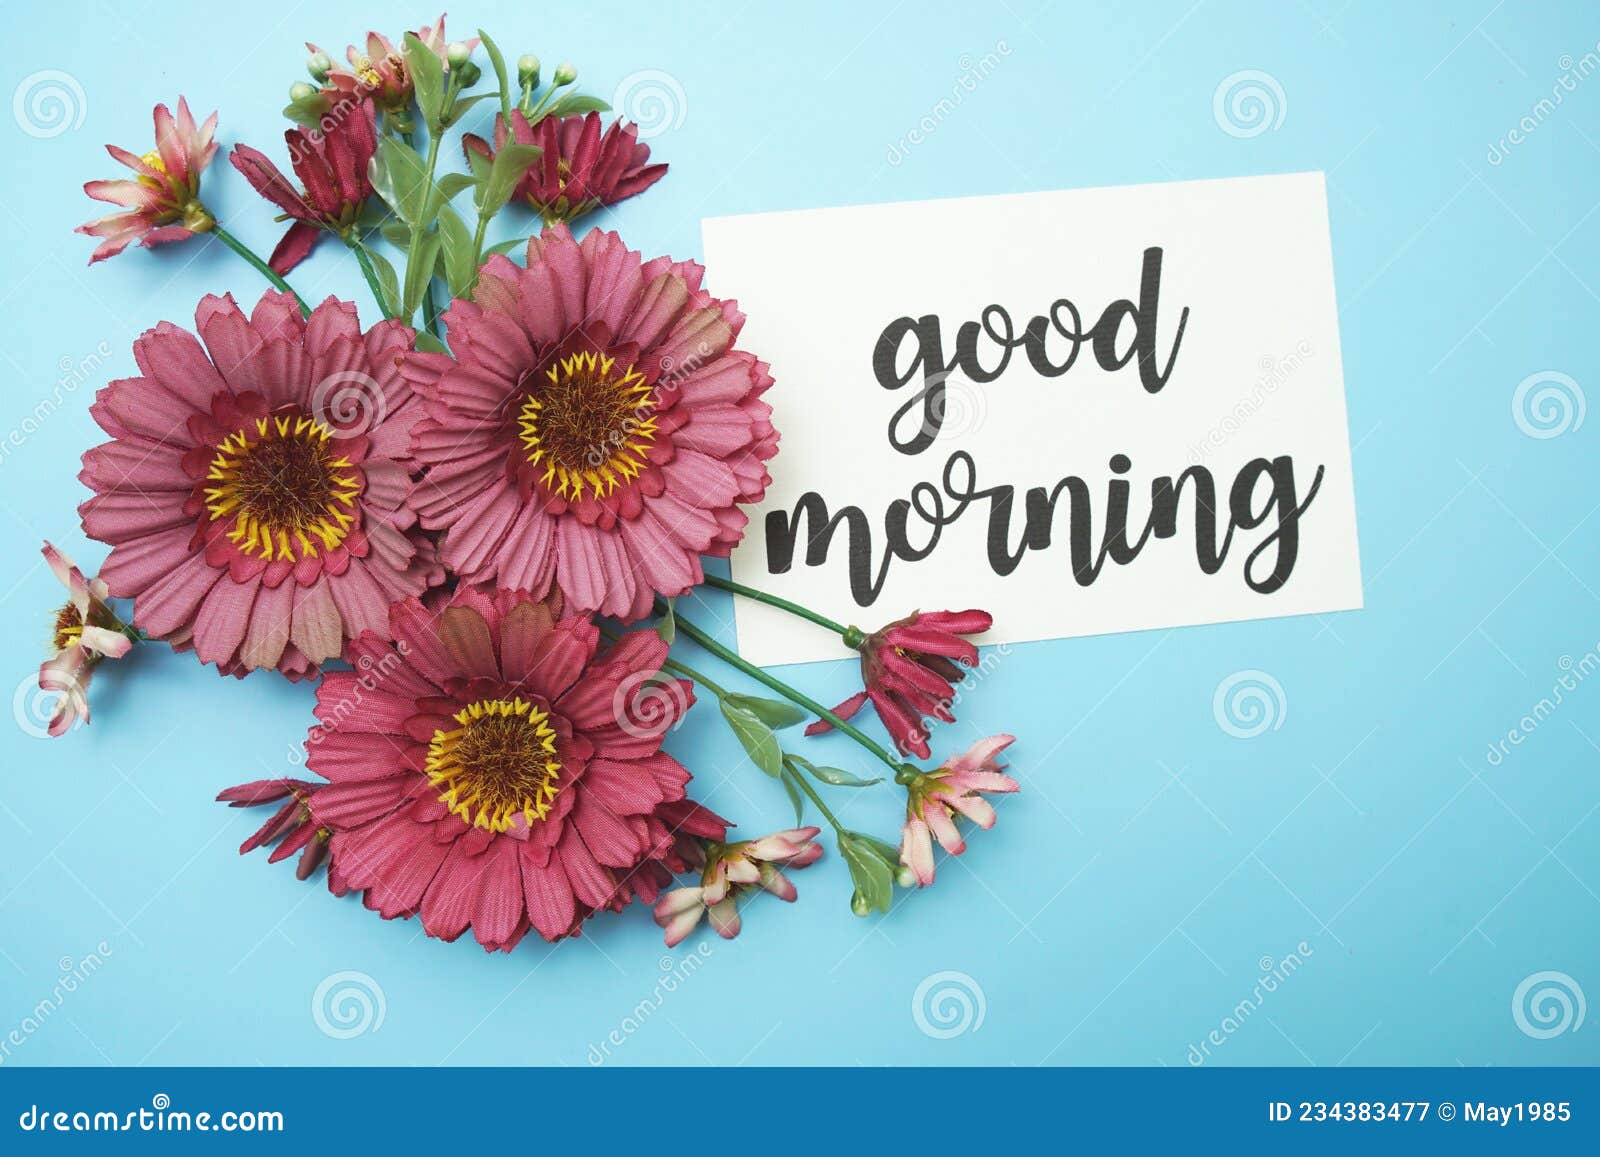 Good Morning Typography Text with Daisy Flowers on Blue Background ...